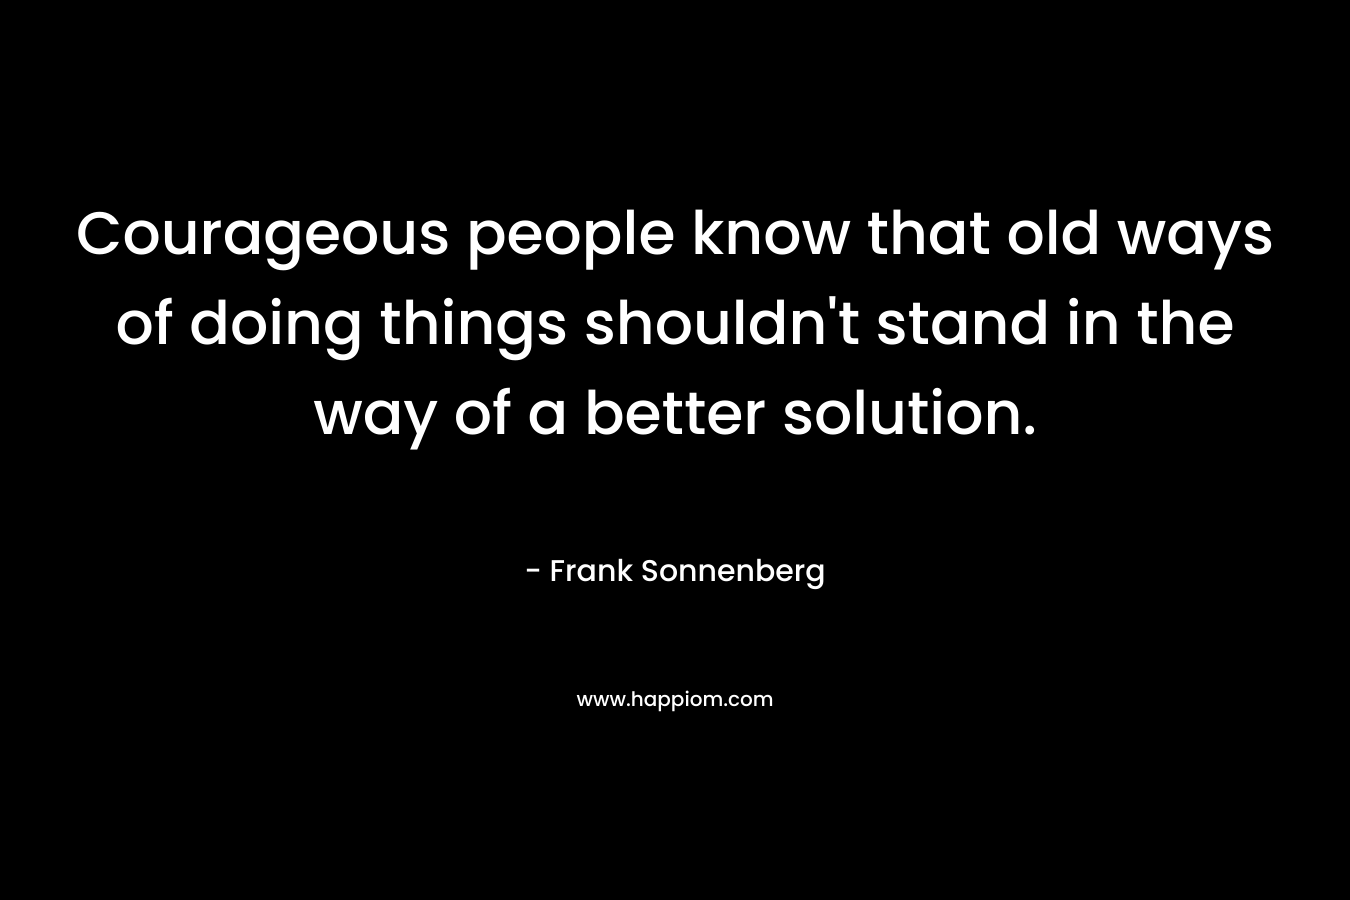 Courageous people know that old ways of doing things shouldn't stand in the way of a better solution.